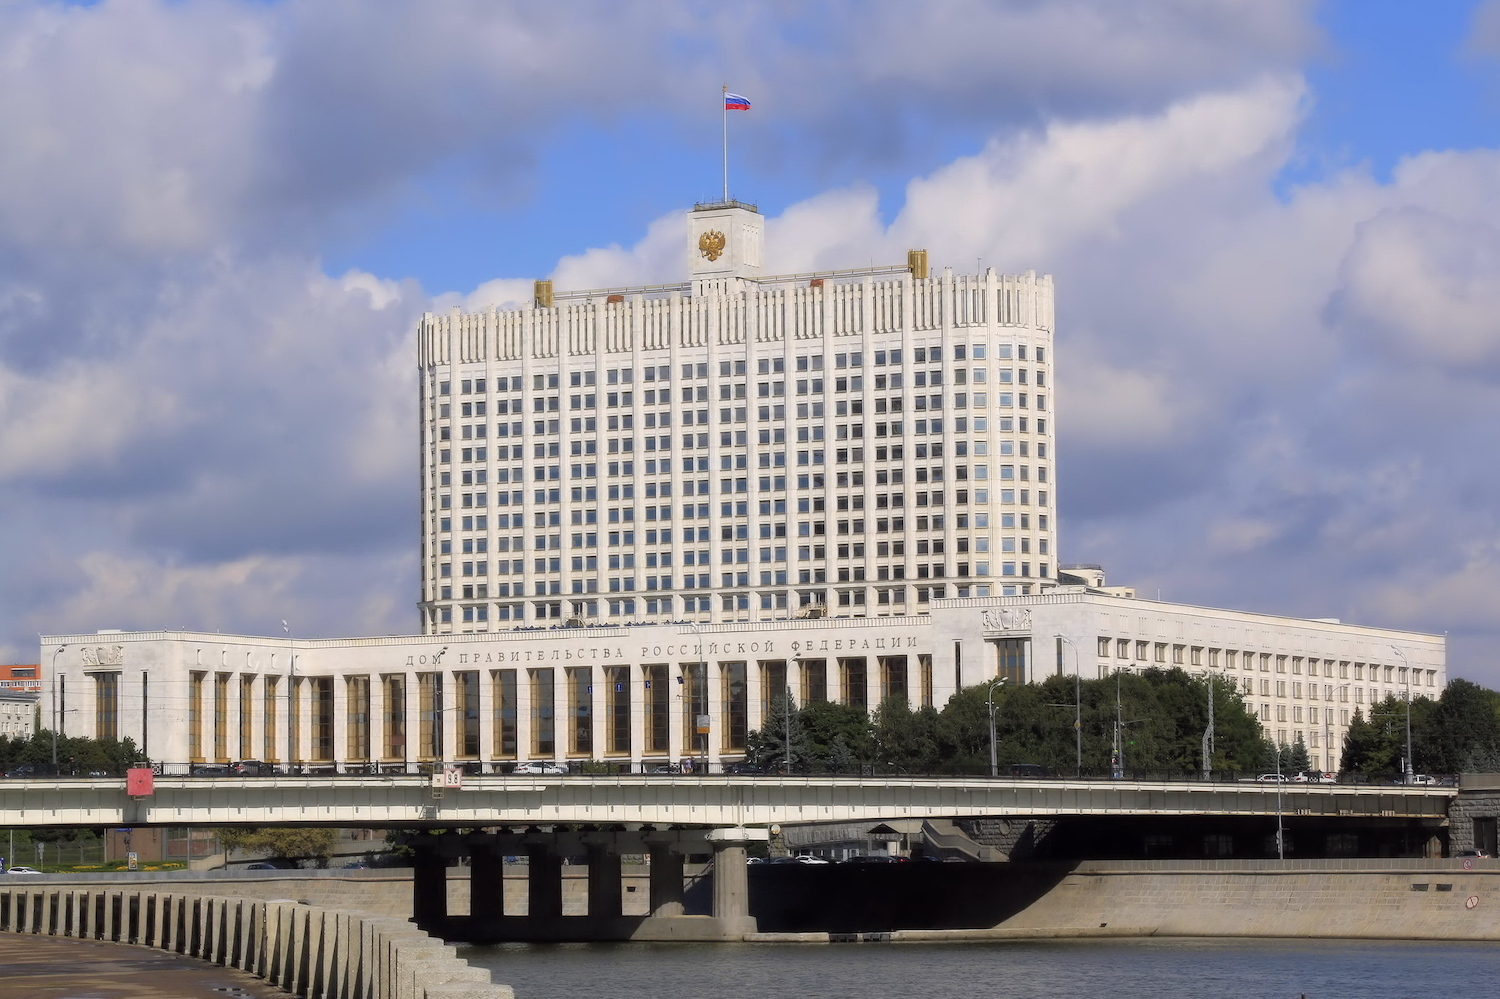 Russia’s-economy-ministry-calls-for-‘controllable-market’-rather-than-crypto-ban